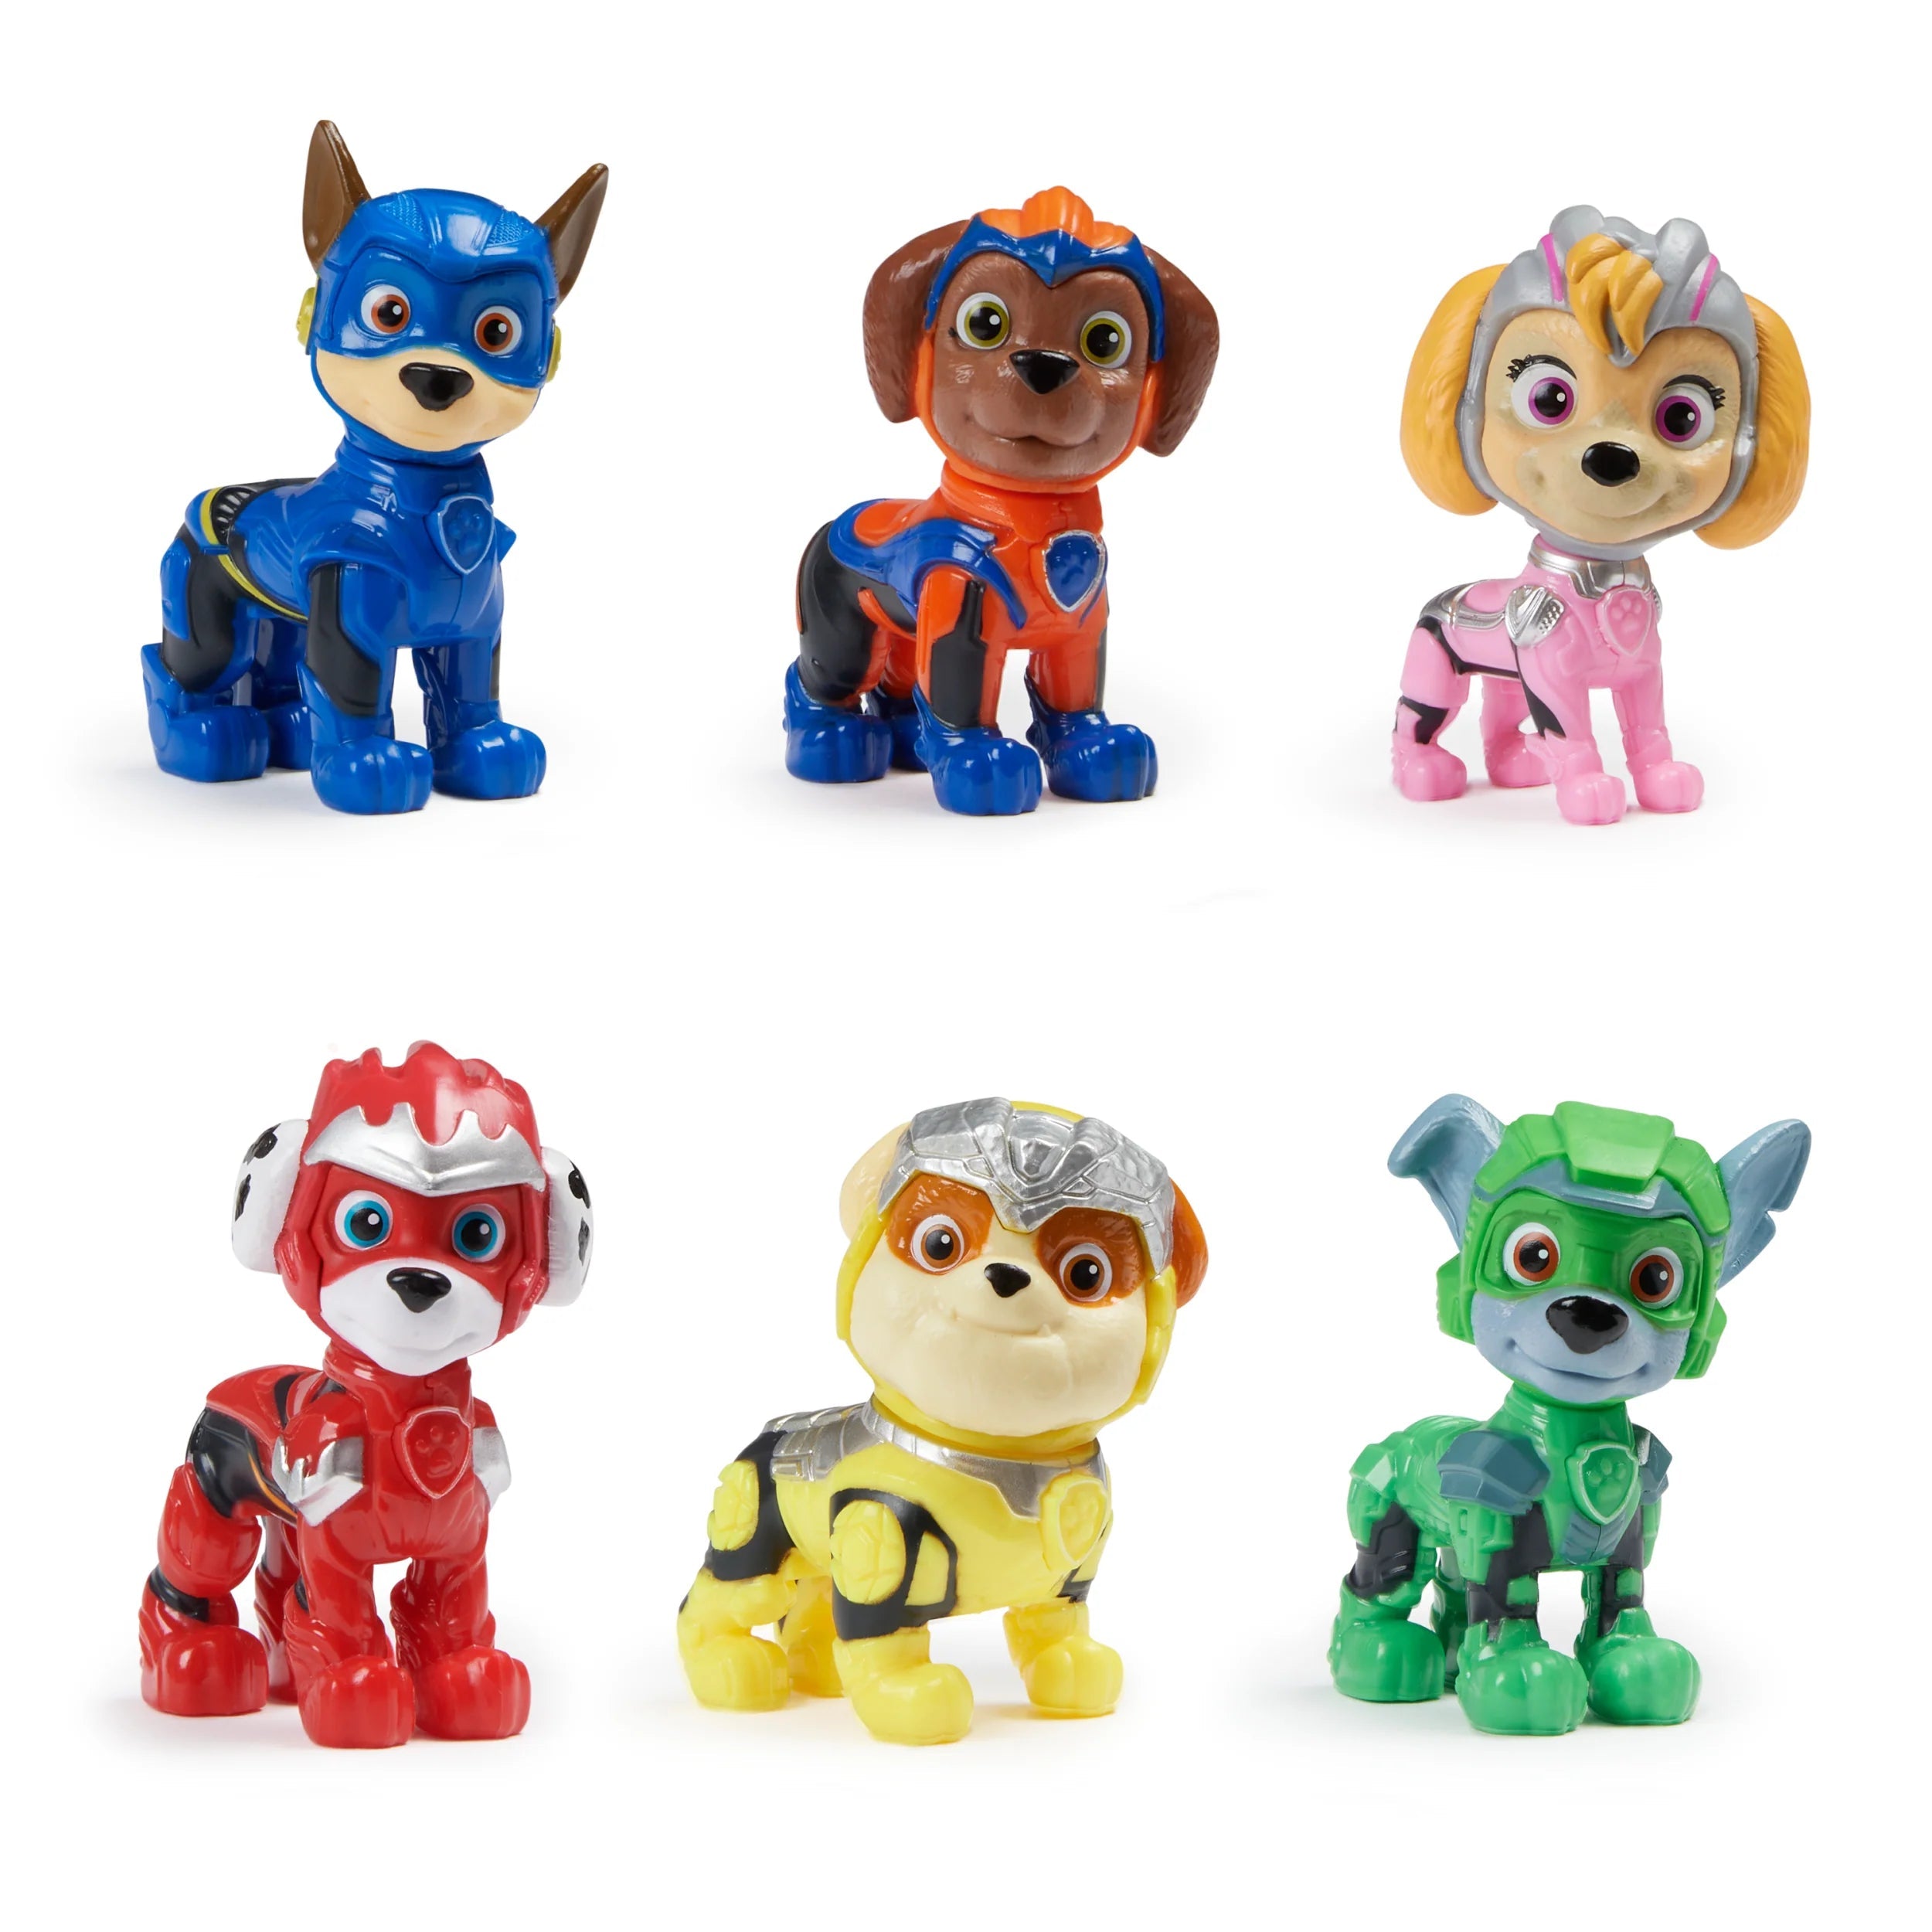 Spin Master-PAW Patrol: The Mighty Movie - Pups Gift Pack-6067029-Legacy Toys